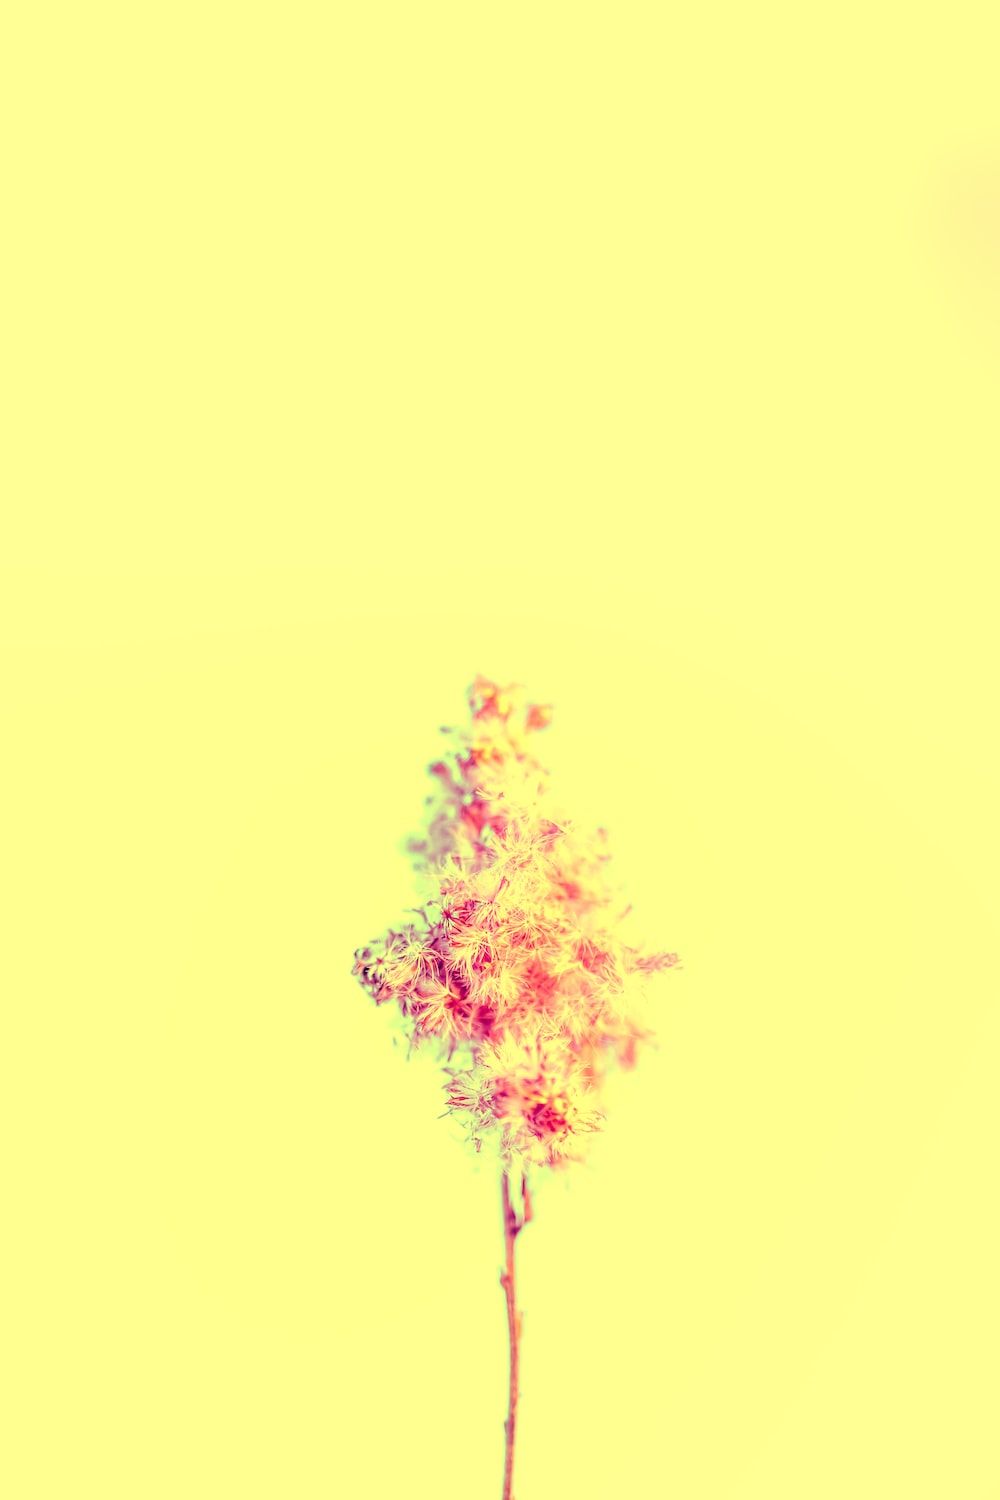 A single flower in a vase on a yellow background photo